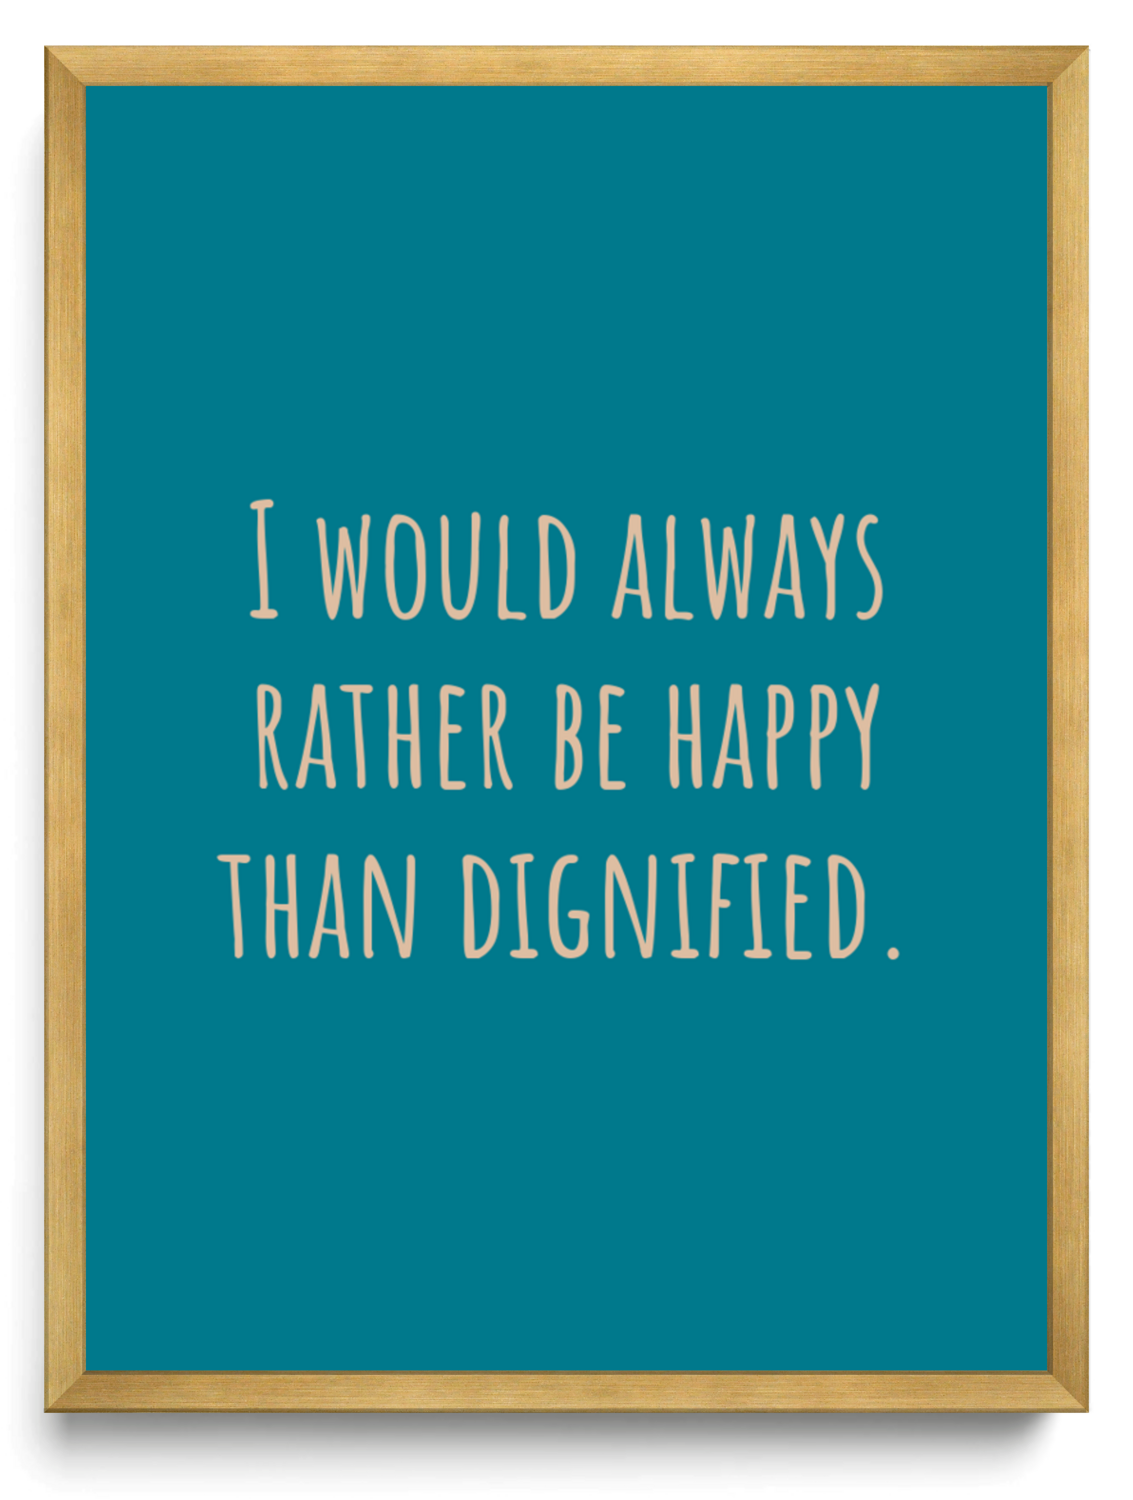 I would always rather be happy than dignified framed typographic print